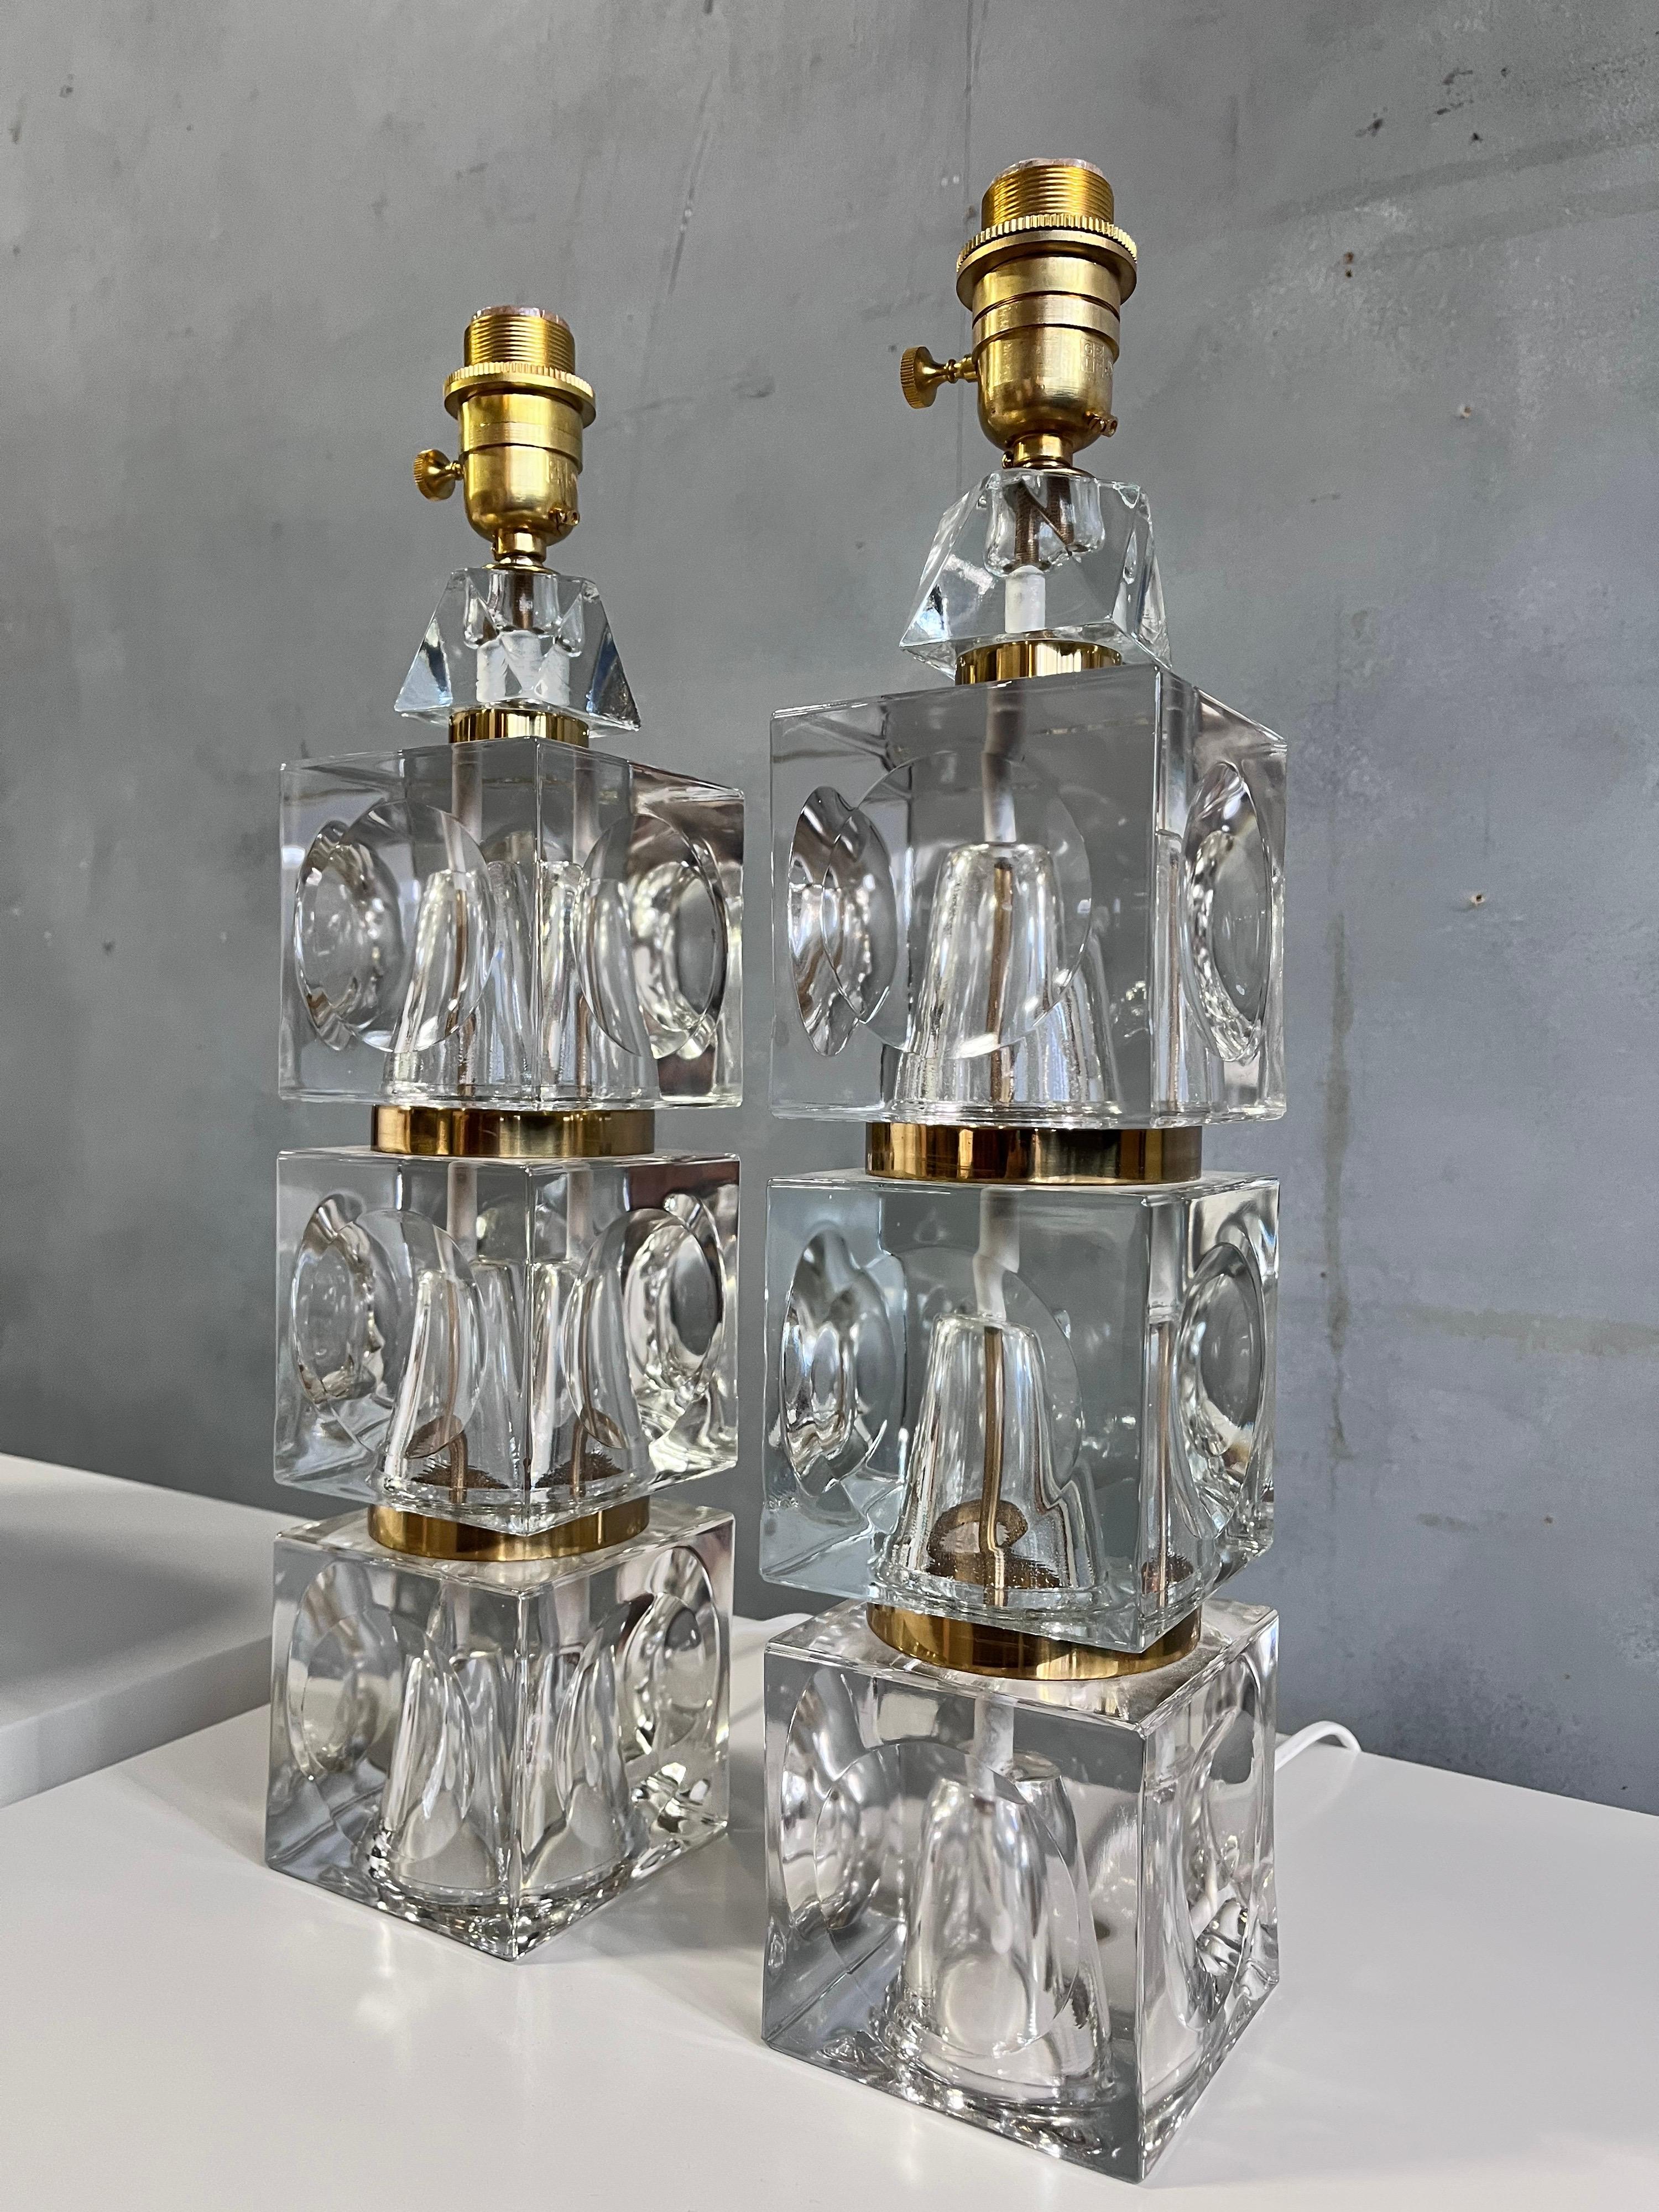 Gorgeous pair of table lamps with stacked glass crystal and brass accents. No scratches or dings to the glass in near flawless condition. Each crystal cube has a concave inset pattern reflecting and amplifying the light around the base. A wonderful